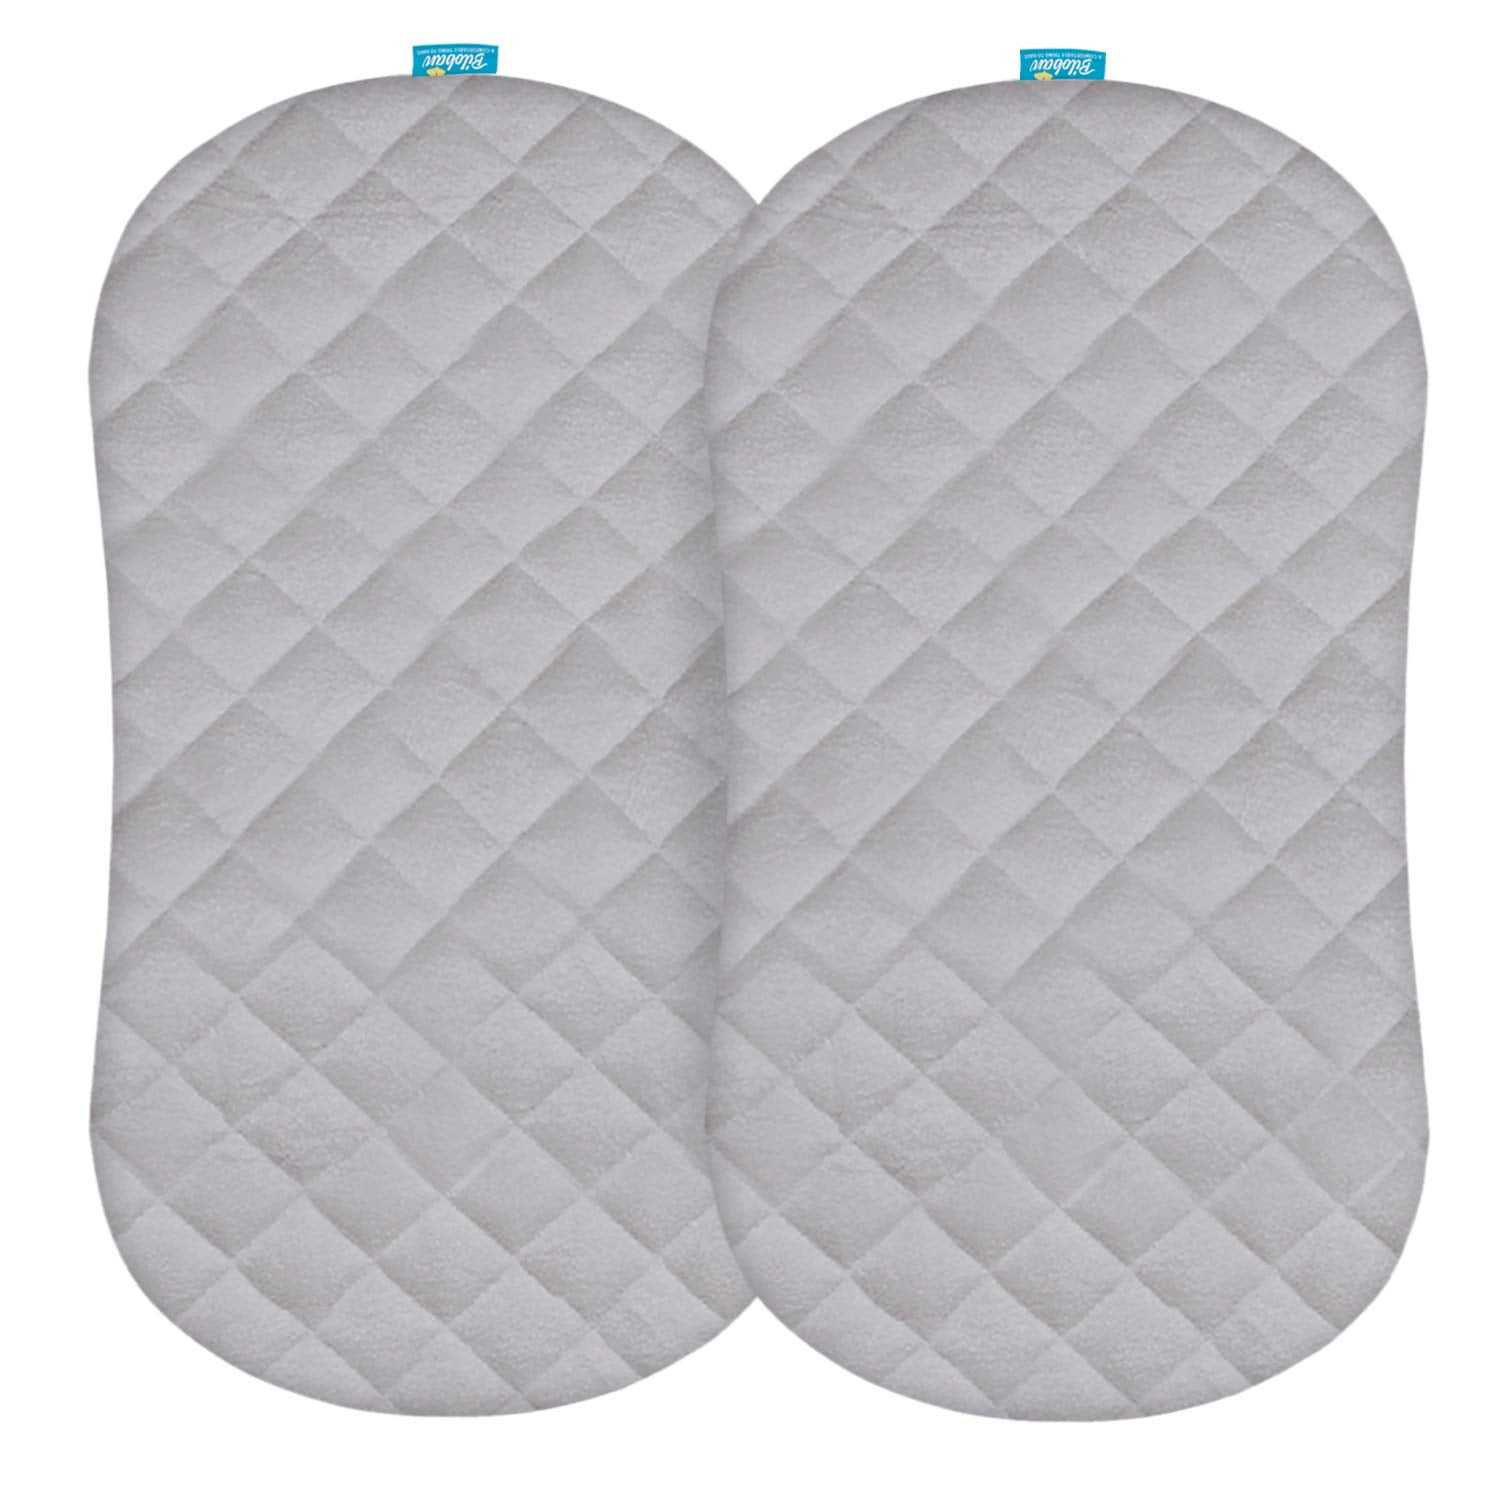 Ultra Soft Bamboo Fleece Surface Washer & Dryer Grey 2 Pack Waterproof No Loosen and Pre-Shrinked Fit for Hourglass/Oval Bassinet Mattress Bassinet Mattress Pad Cover